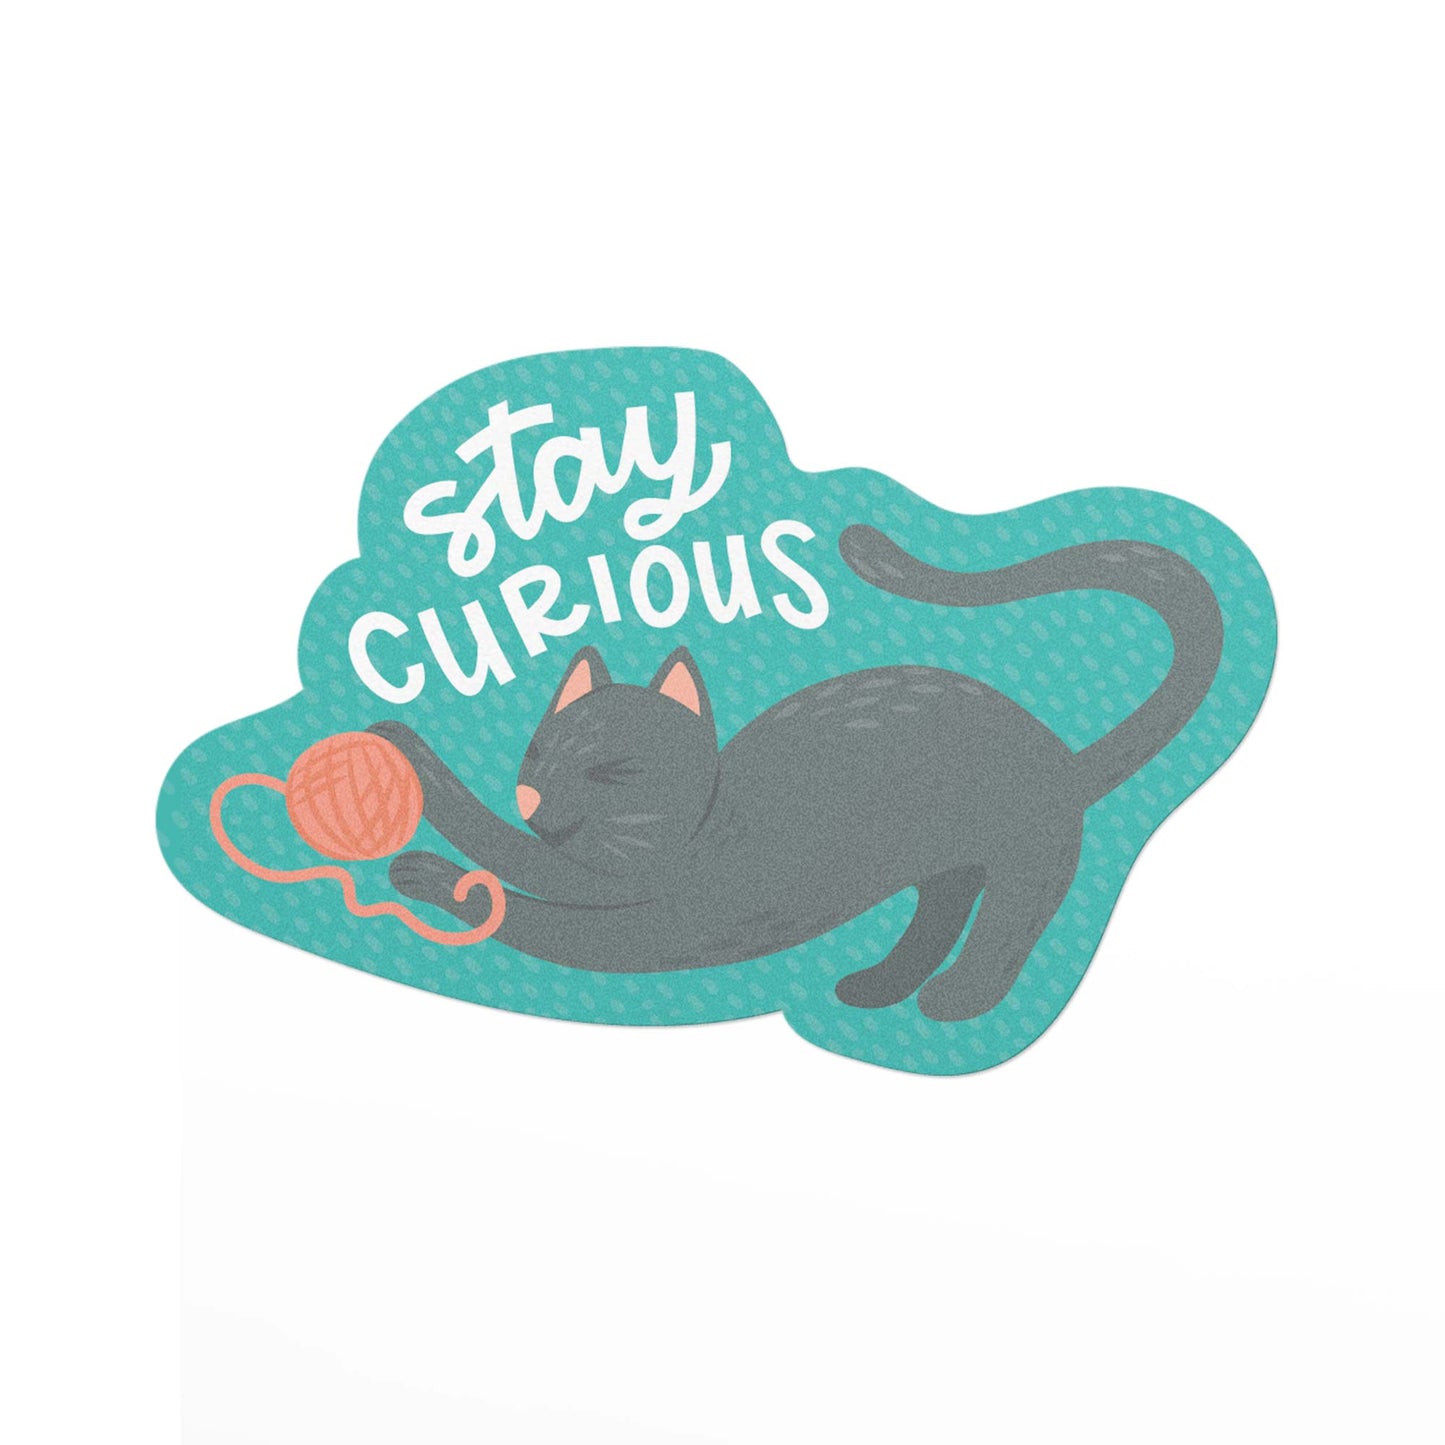 Durable vinyl sticker featuring a cat playing with and ball of yarn and the hand lettered text, Stay curious